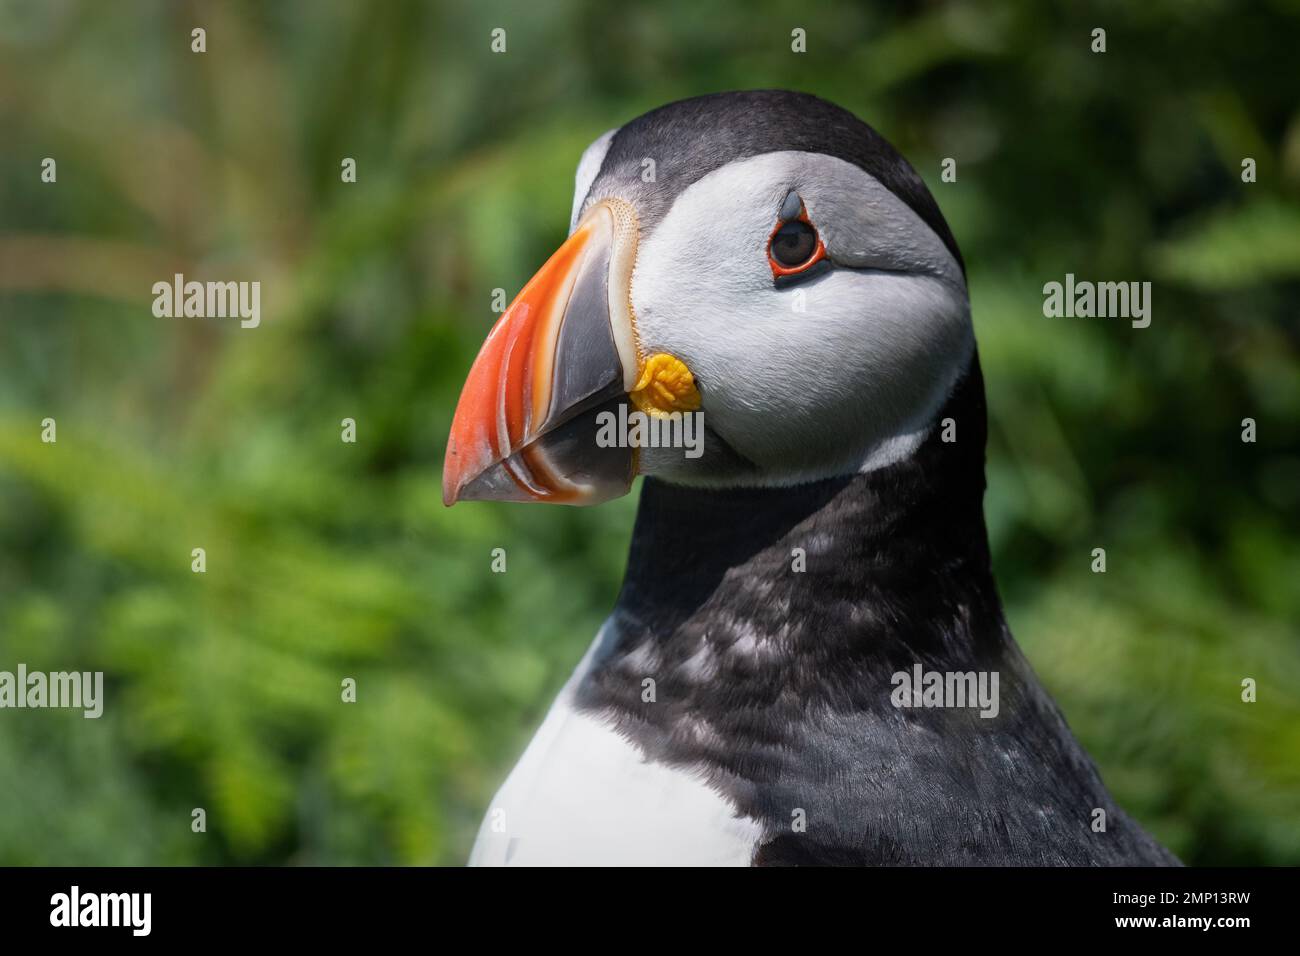 A very close portrait of an atlantic puffin showing the detail in its colourful beak, head and feather detail Stock Photo